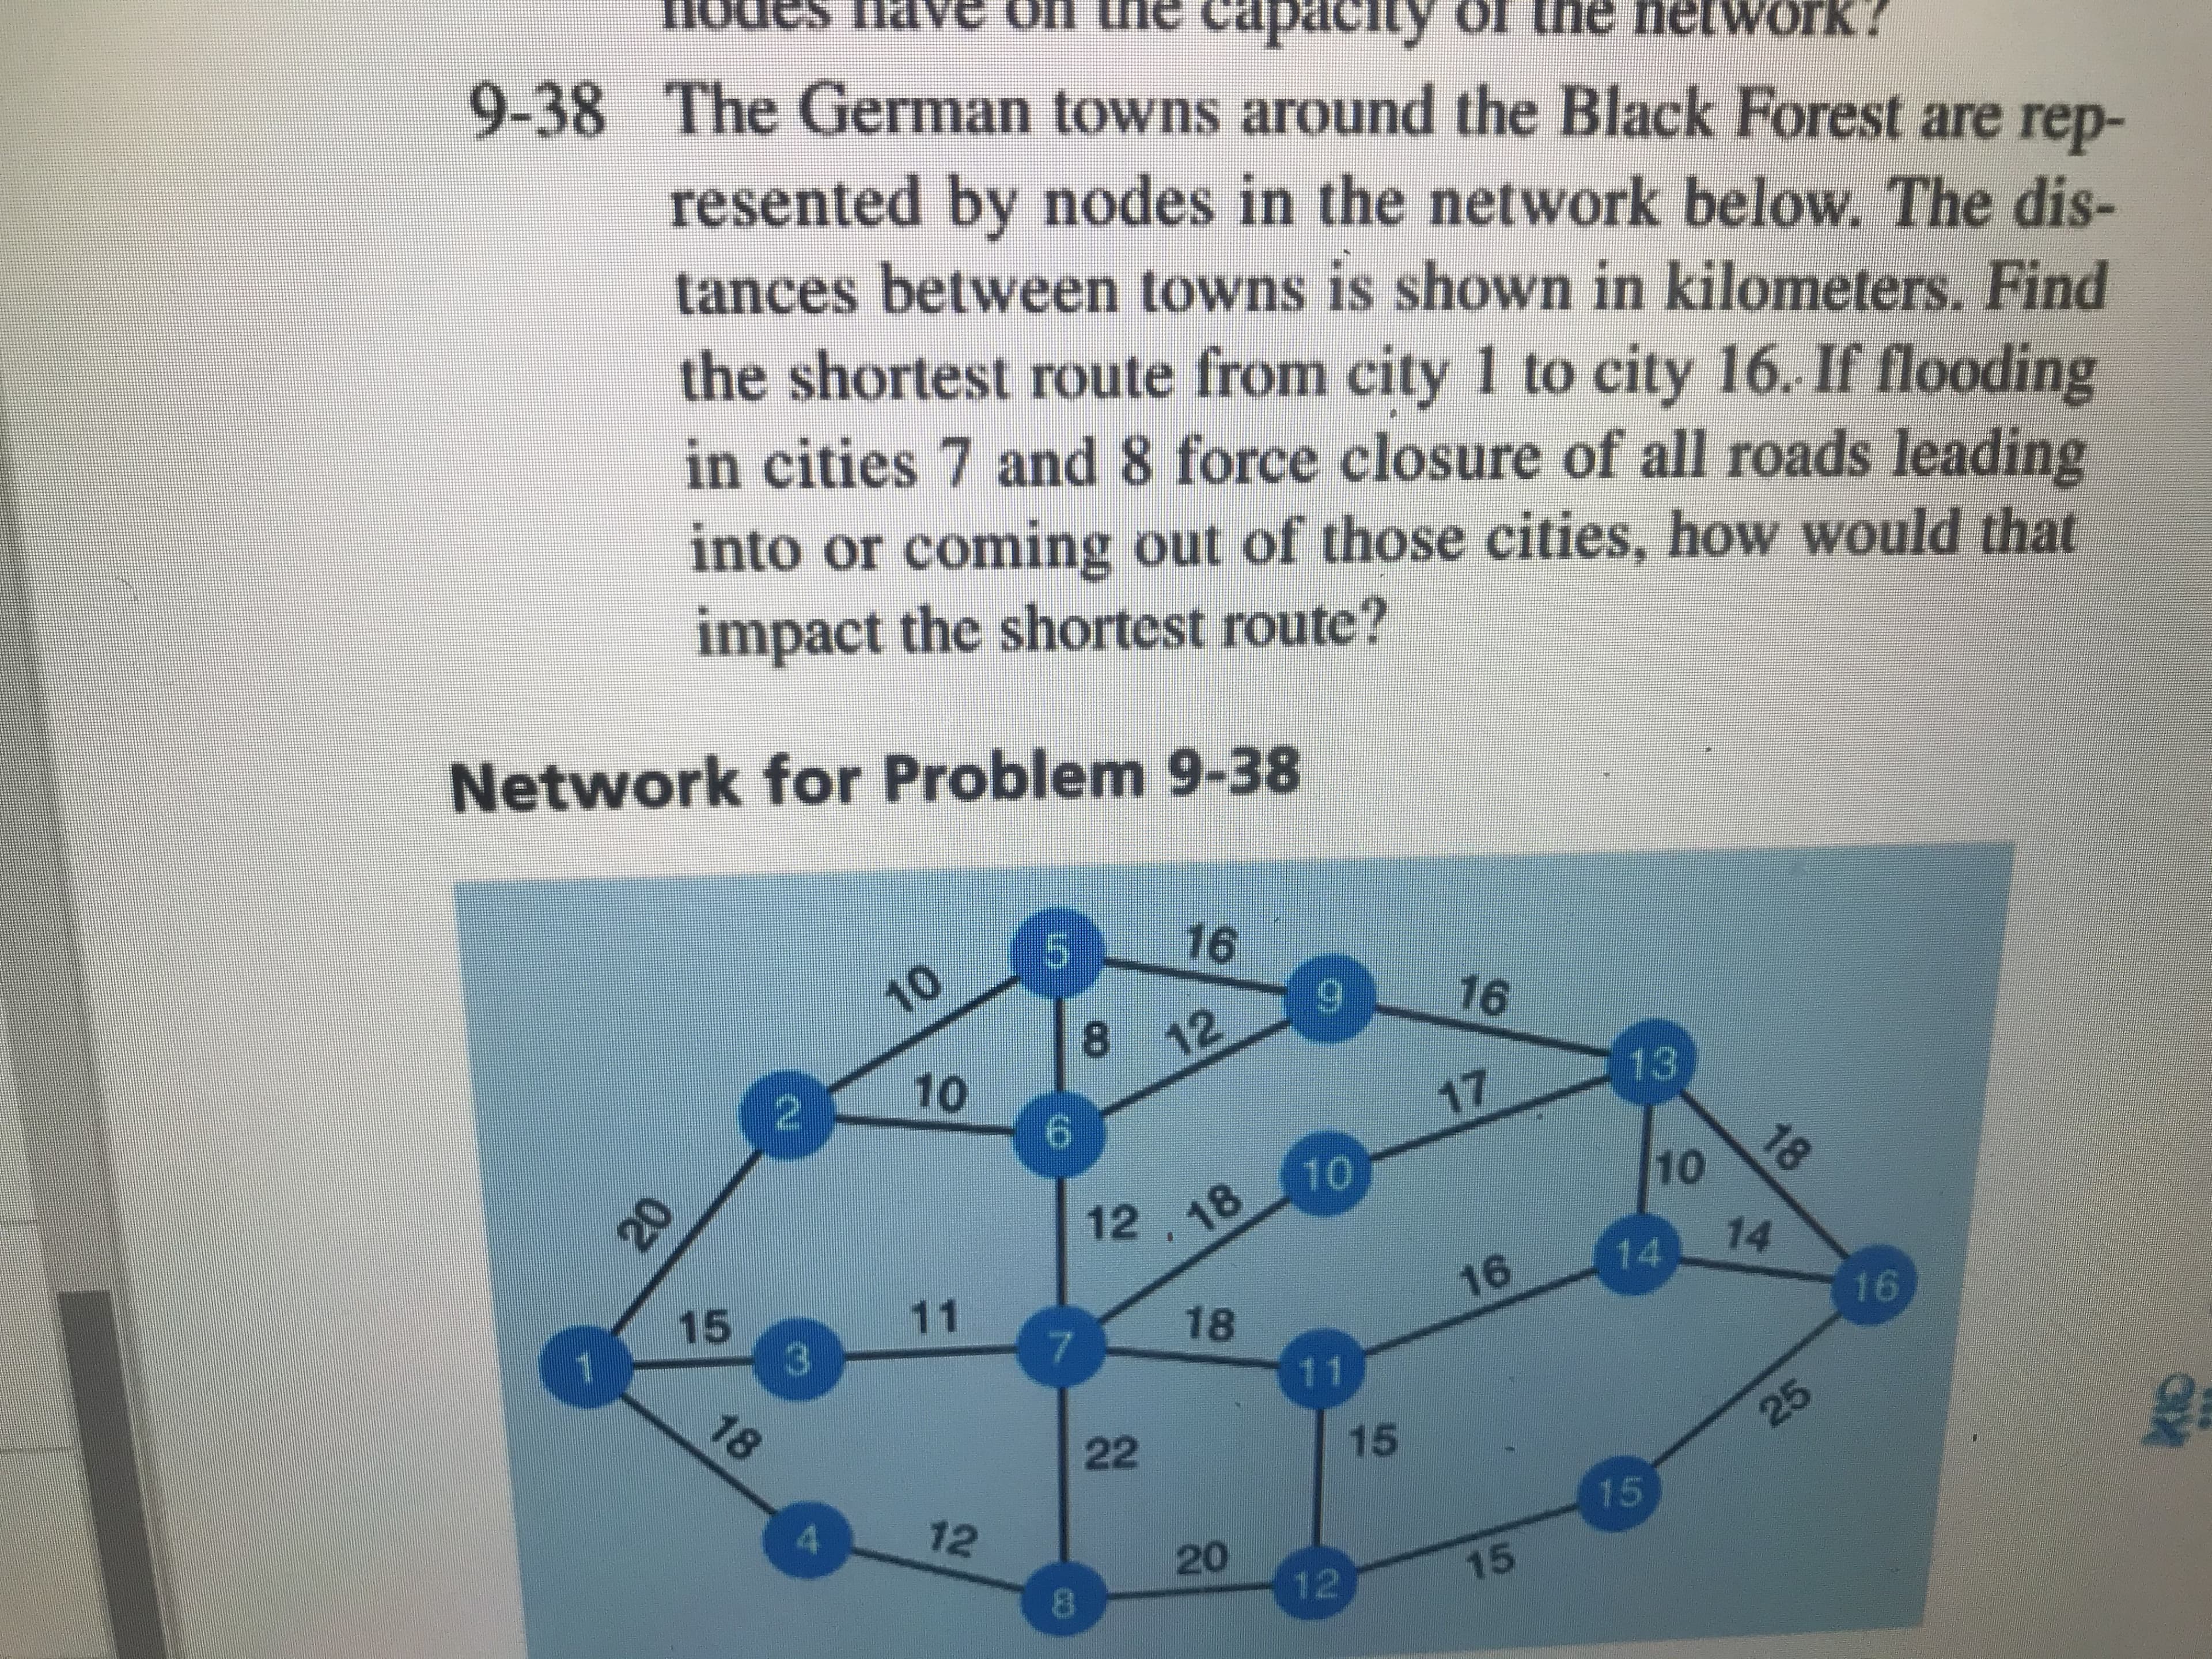 cap
9-38 The German towns around the Black Forest are
of the netWork?
pou
rep-
resented by nodes in the network below. The dis-
tances between towns is shown in kilometers. Find
the shortest route from city 1 to city 16. If flooding
in cities 7 and 8 force closure of all roads leading
into or coming out of those cities, how would that
impact the shortest route?
Network for Problem 9-38
16
10
5
16
8
12
10
13
2
17
18
10
10
12
18
14
14
16
15
C3
11
16
18
7
11
18
22
15
25
15
12
20
15
12
aX
